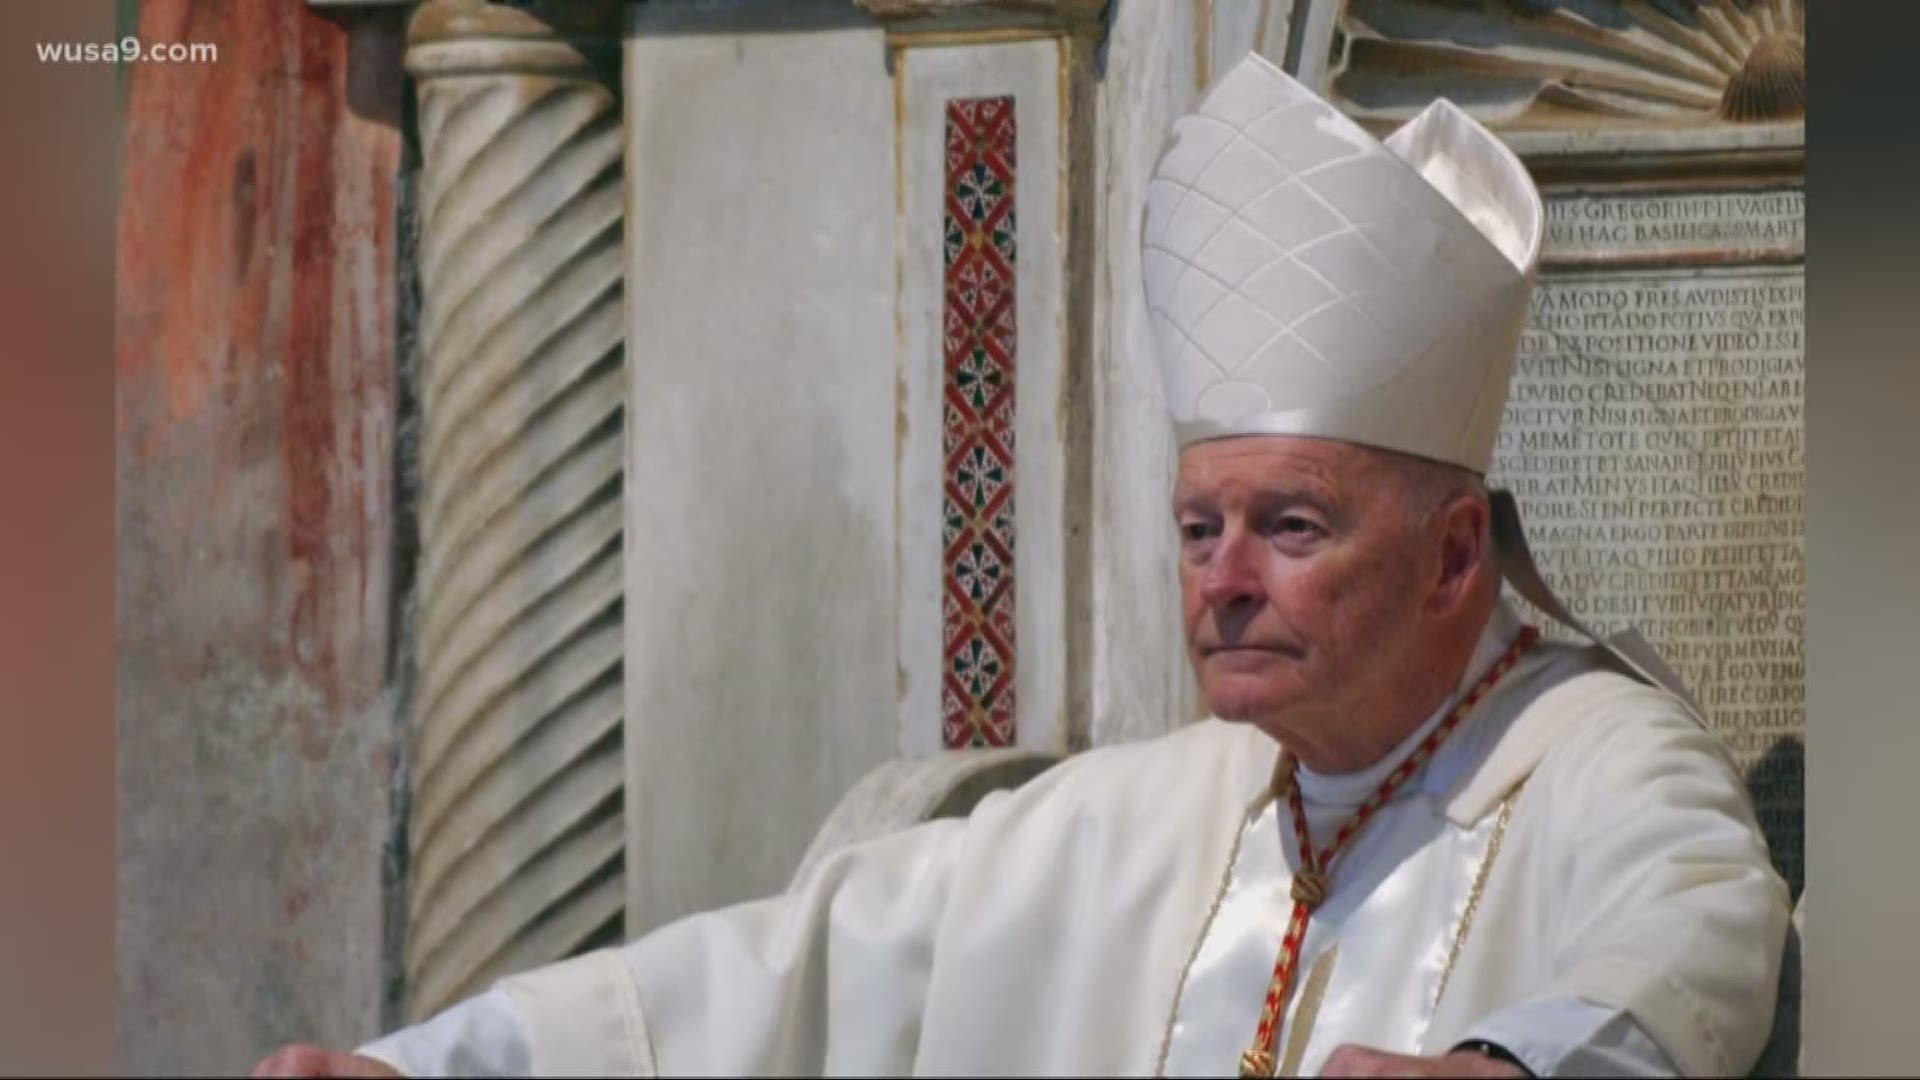 Cardinal Theodore McCarrick served as priest for more than 60 years and was the Archbishop of Washington from 2001 to 2006. Our Andrea Roane has more on McCarrick's history within the Catholic Church.